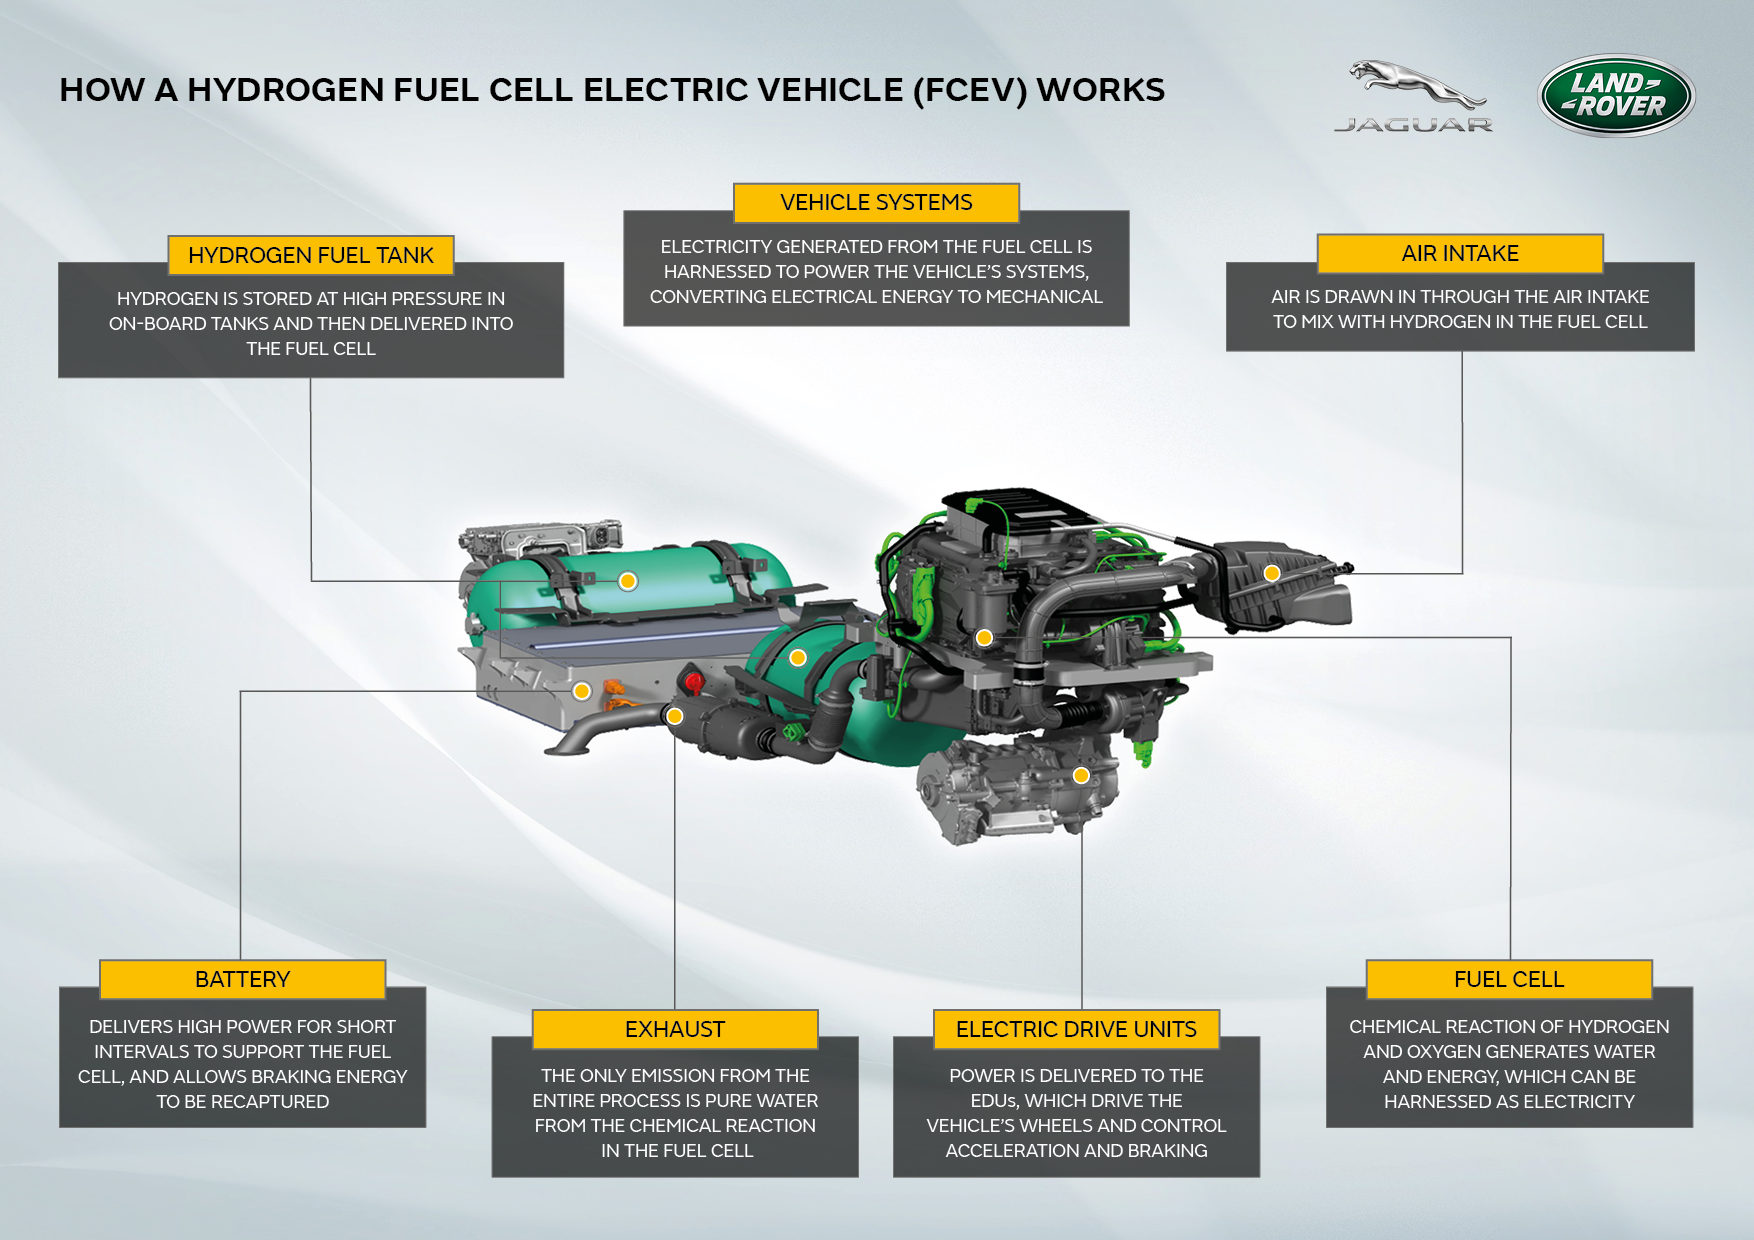 How a Hydrogen Fuel Cell Electric Vehicle Works Infographic